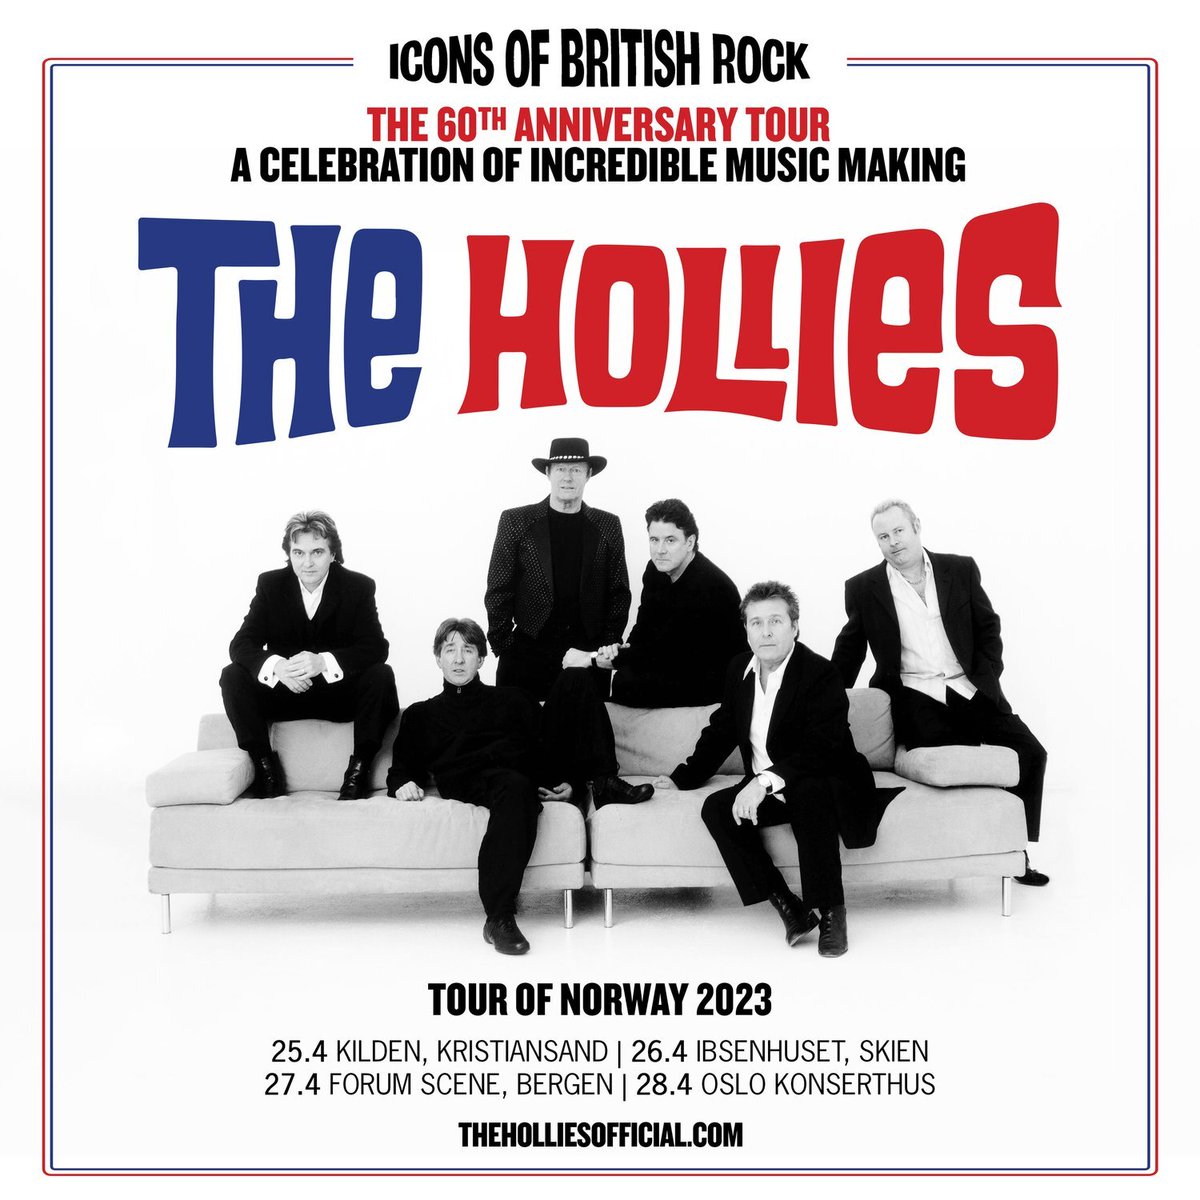 The Hollies are on tour in Norway! Want to see them play? Check out the dates right here: theholliesofficial.com/tour  

#TheHollies #TheHolliesTour #BritishRock